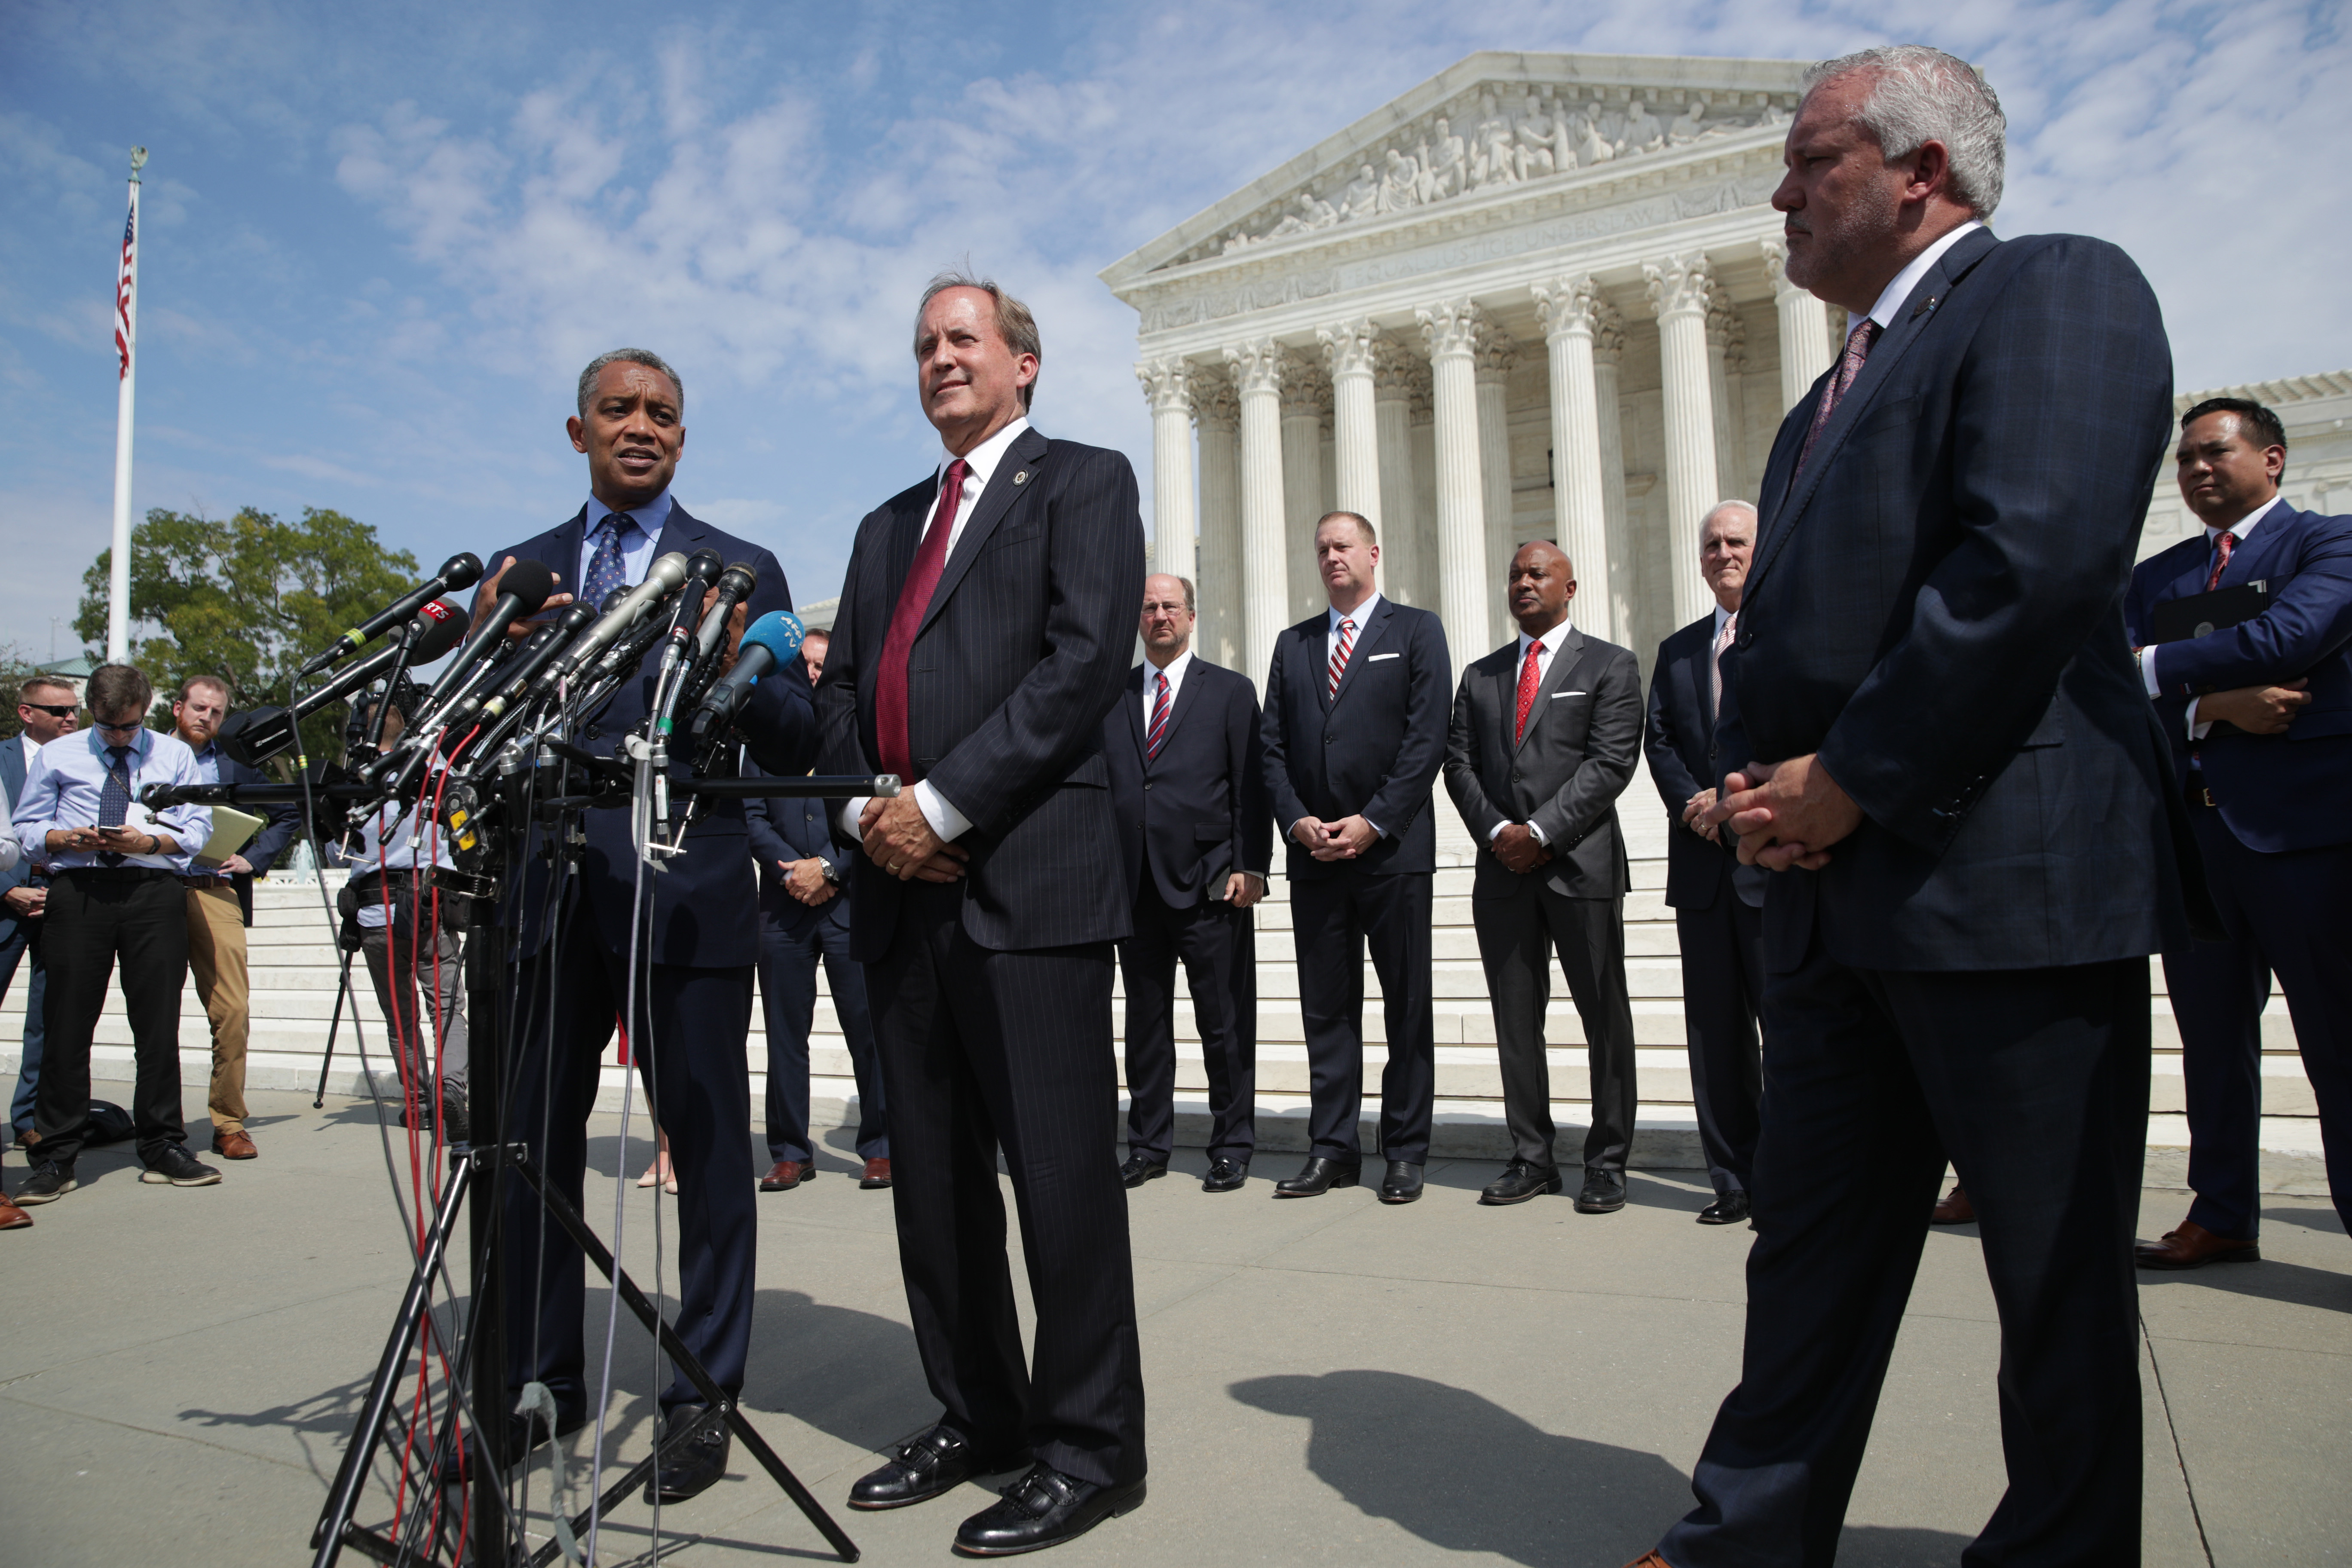 Washington, DC Attorney General Karl Racine (L) speaks as Arkansas Attorney General Leslie Rutledge and Texas Attorney General Ken Paxton listens during a news conference in front of the U.S. Supreme Court September 9, 2019 in Washington, DC. (Photo by Alex Wong/Getty Images)